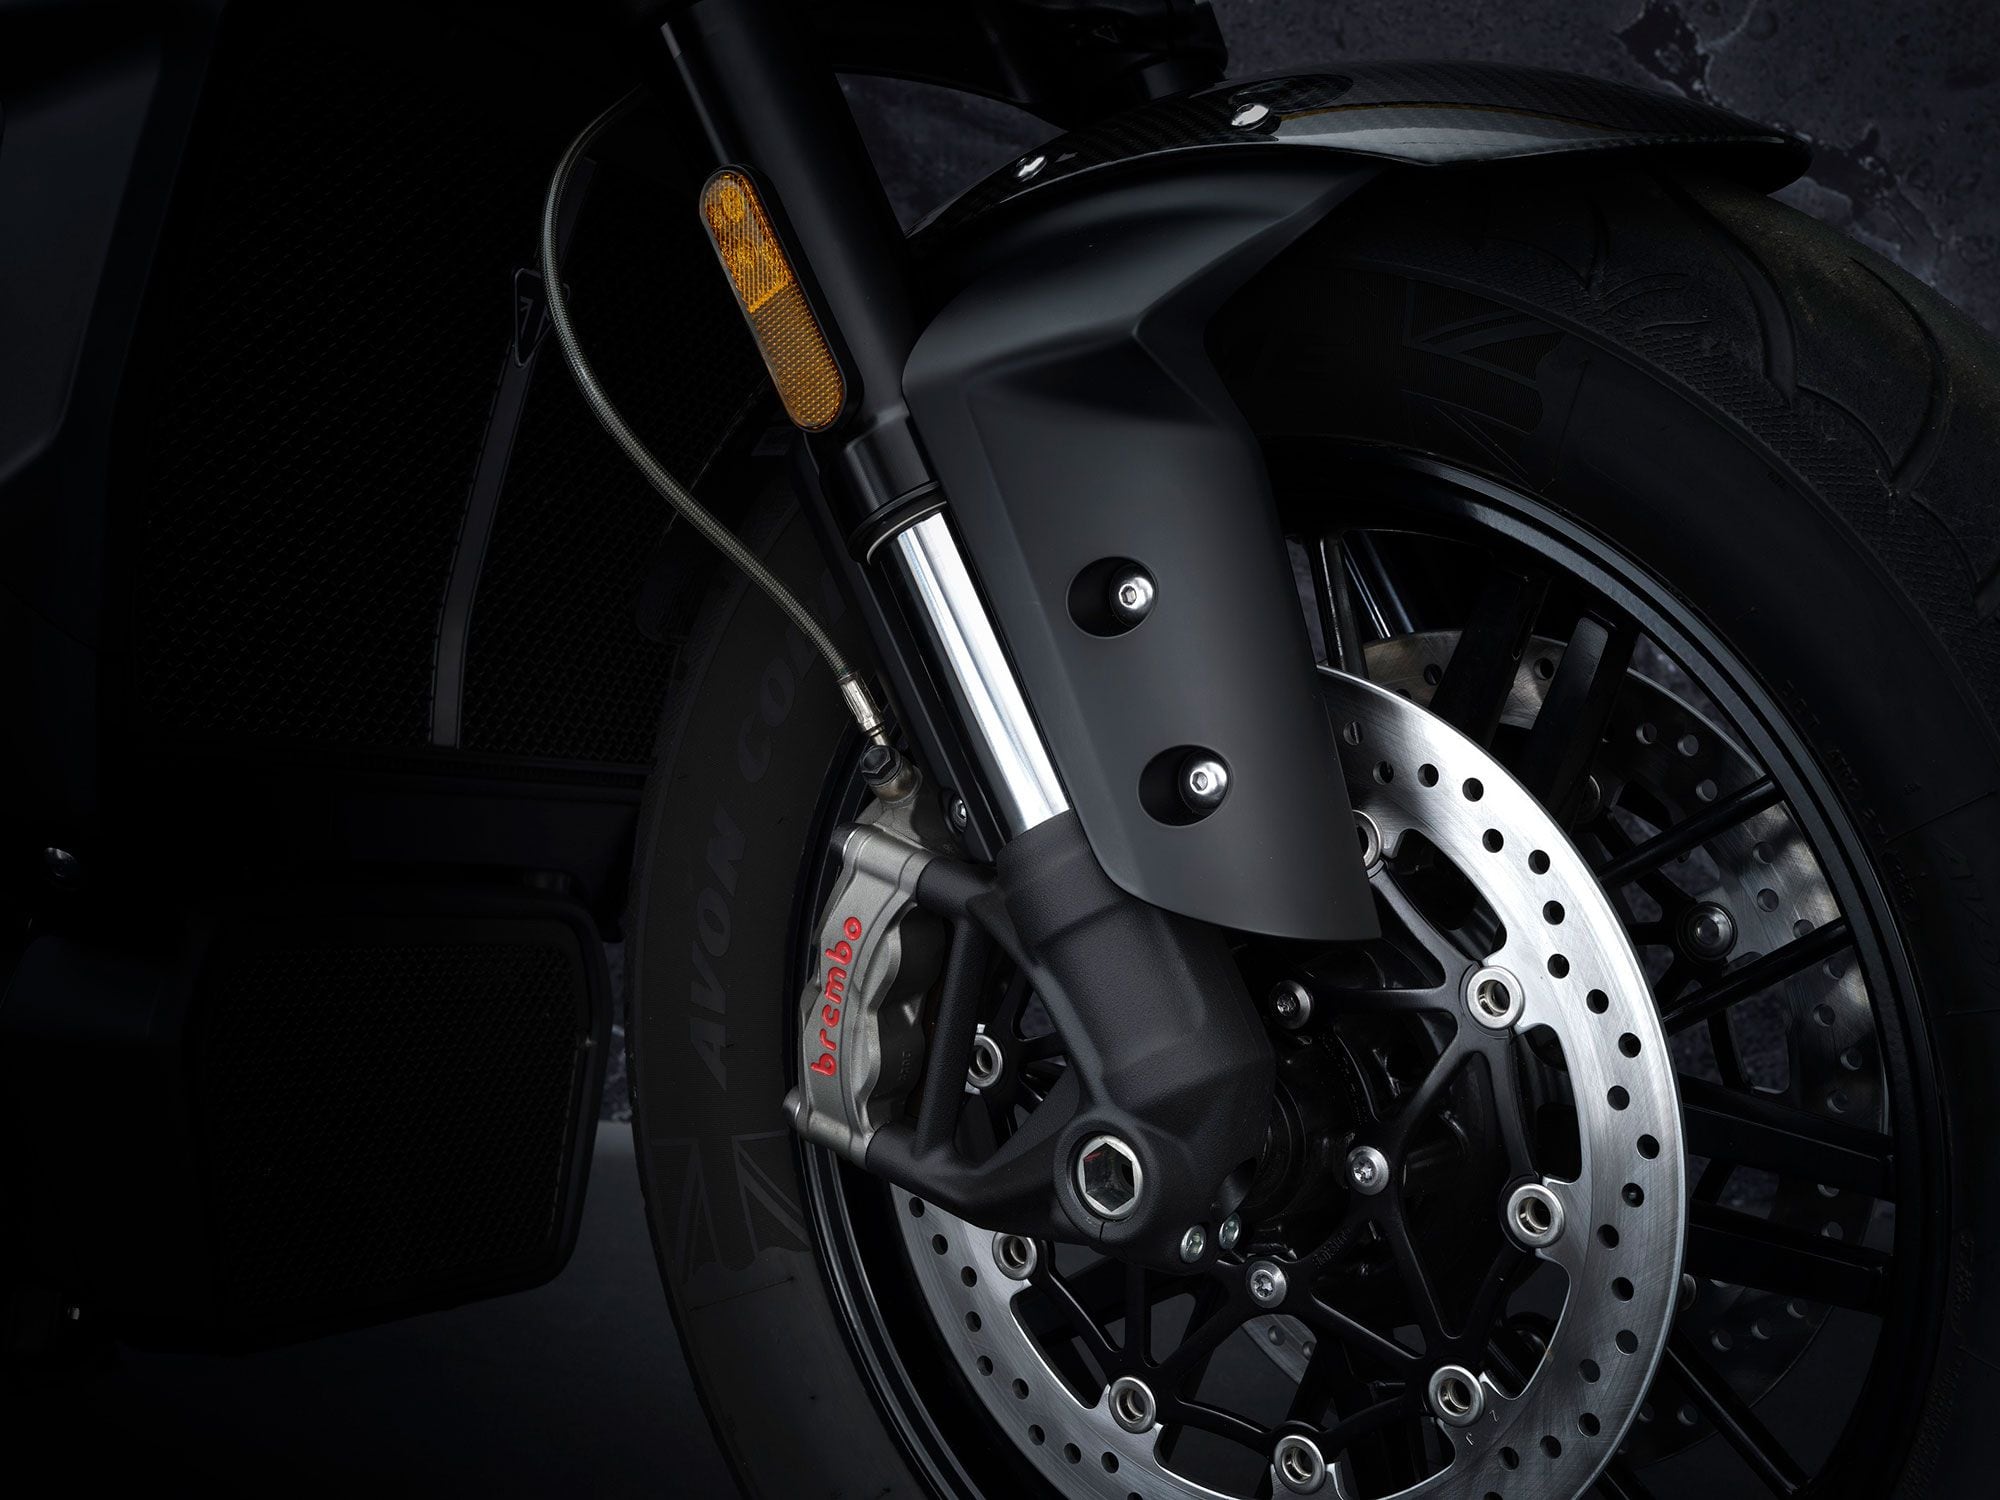 The brakes are high-end Brembo Stylema units with dual floating discs up front.